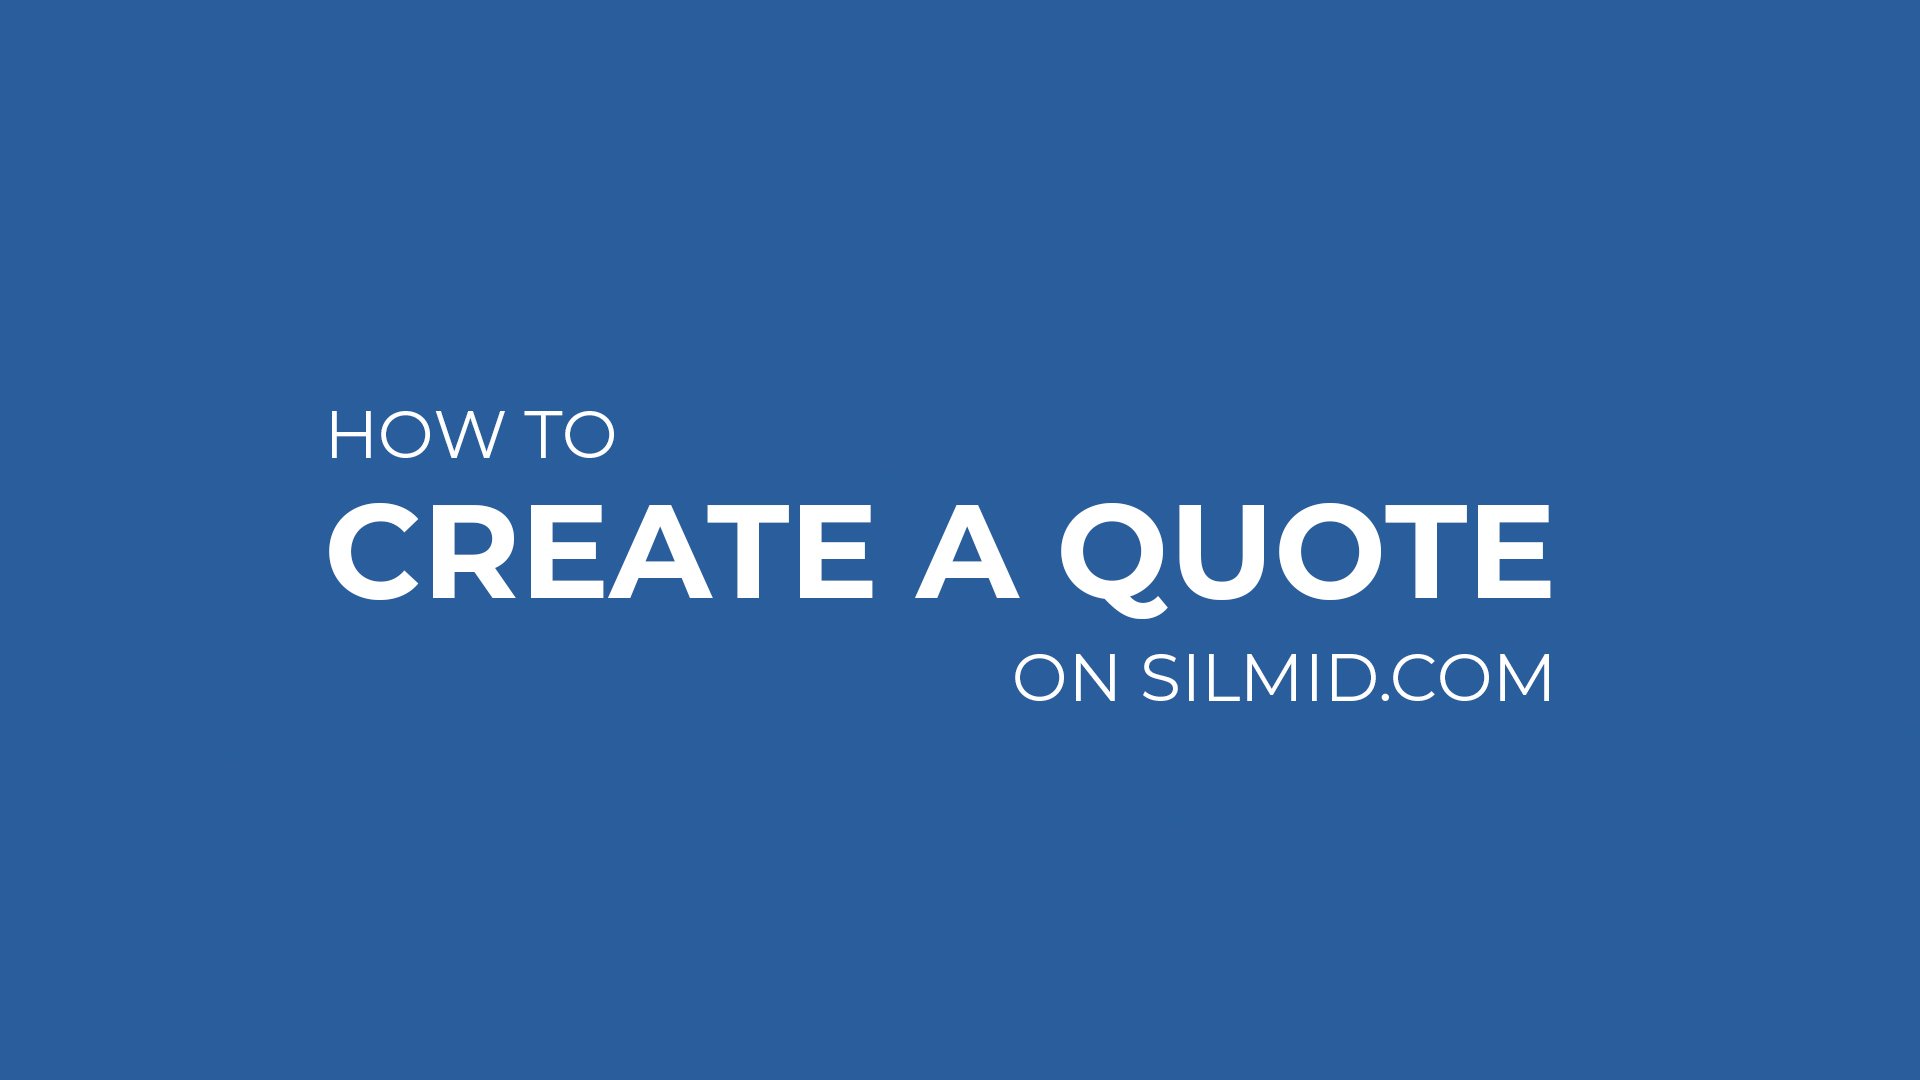 How to create a quote on Silmid